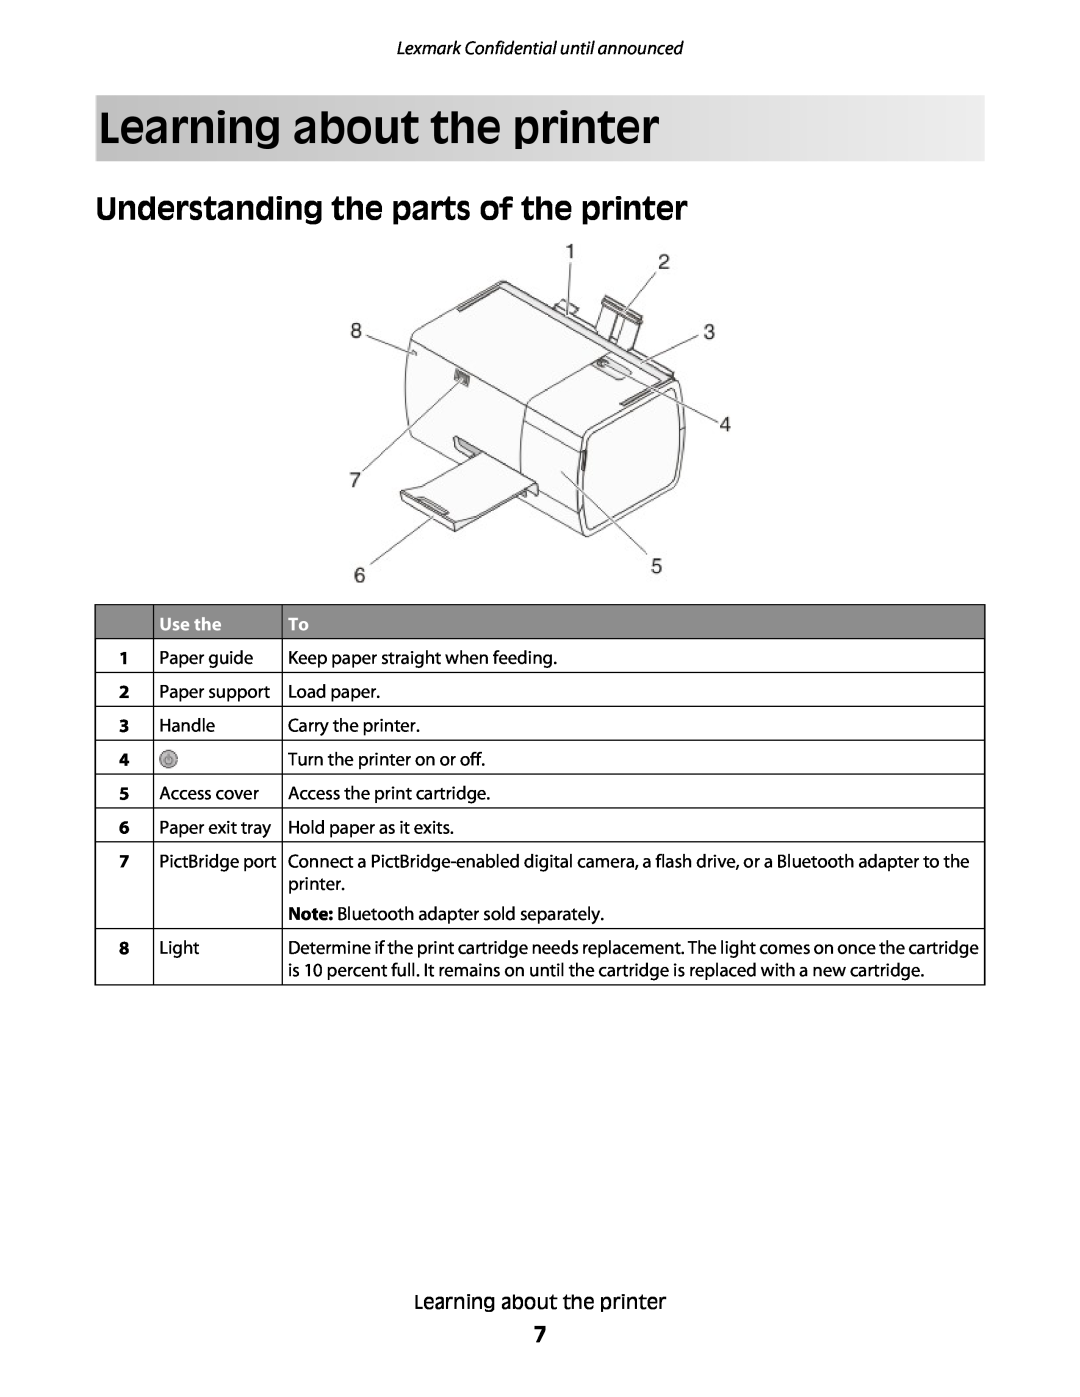 Lexmark P200 manual Learning about the printer, Understanding the parts of the printer, Use the 